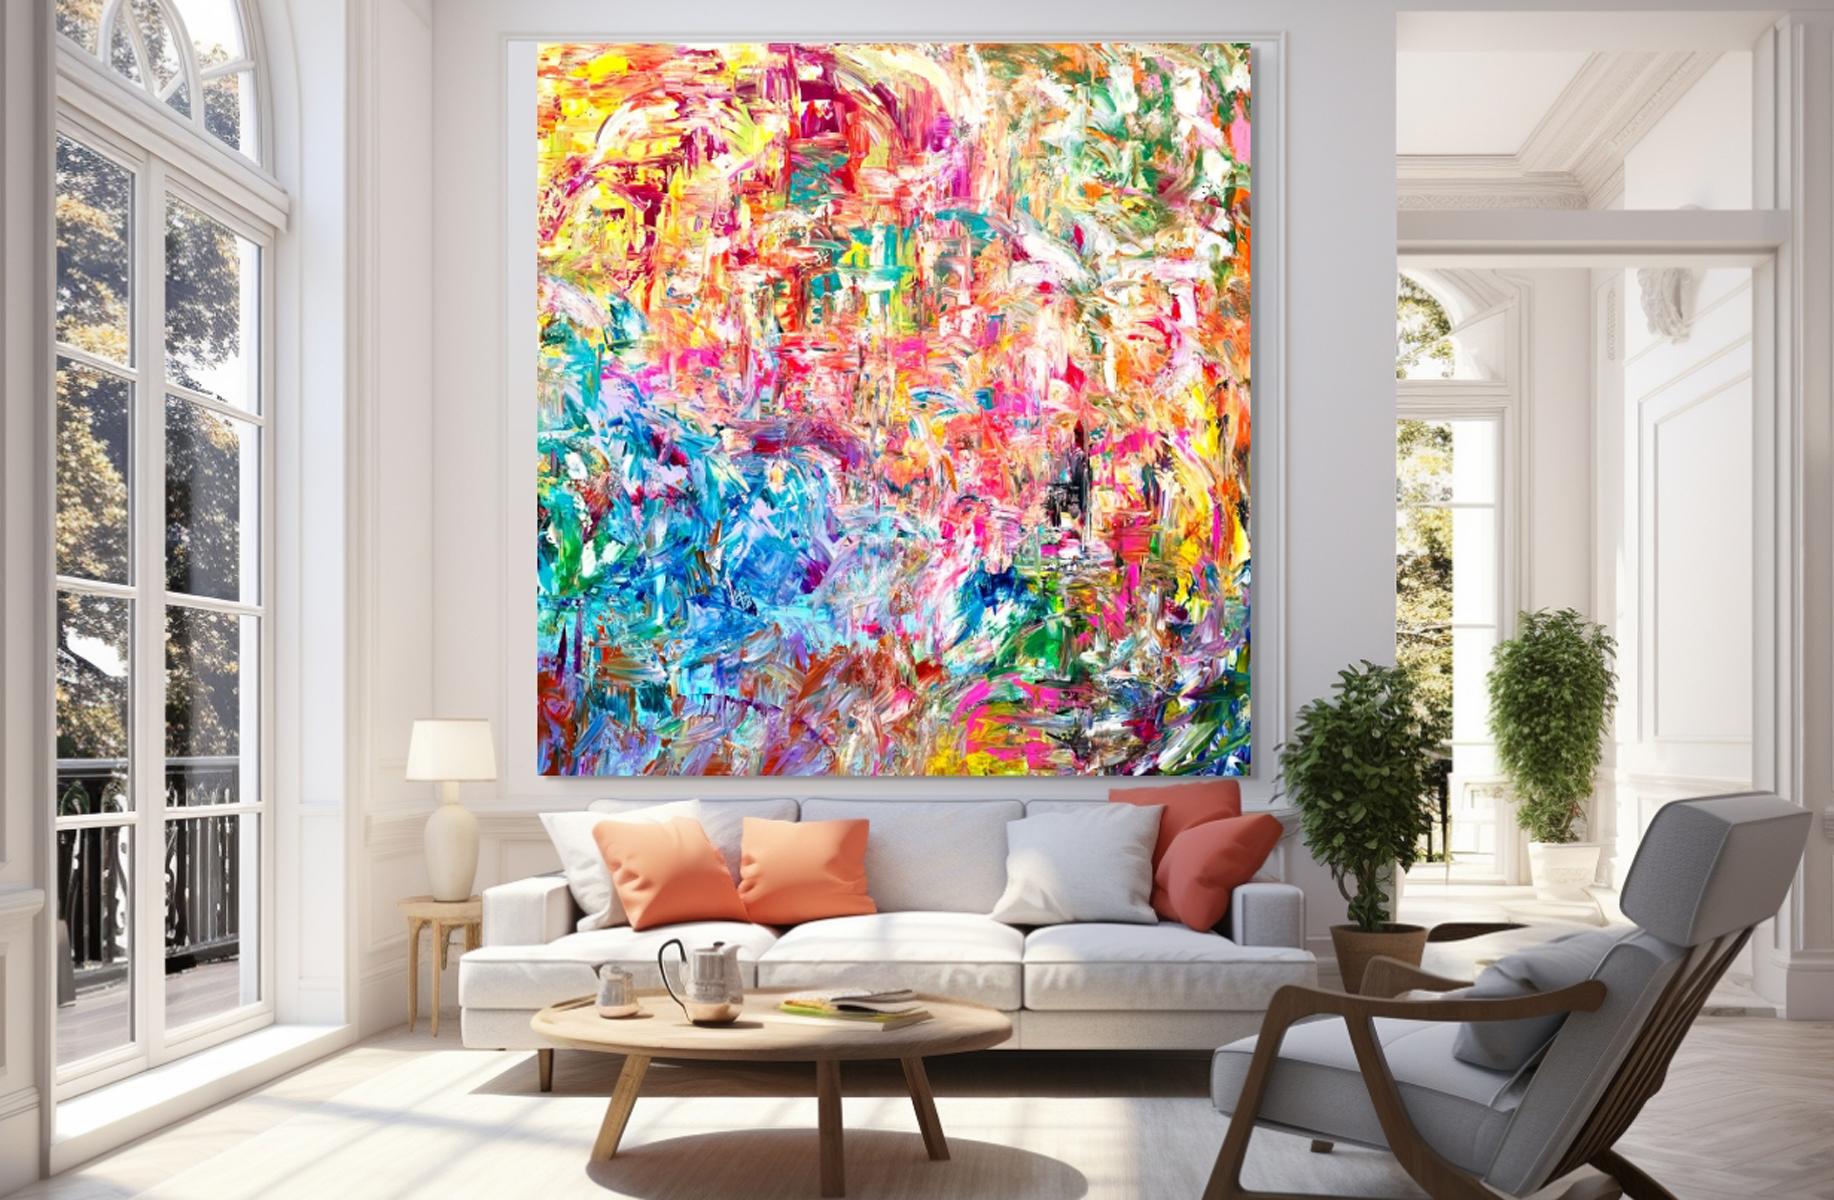 Arriving at Elysium Plains - Abstract Expressionist Painting by Estelle Asmodelle